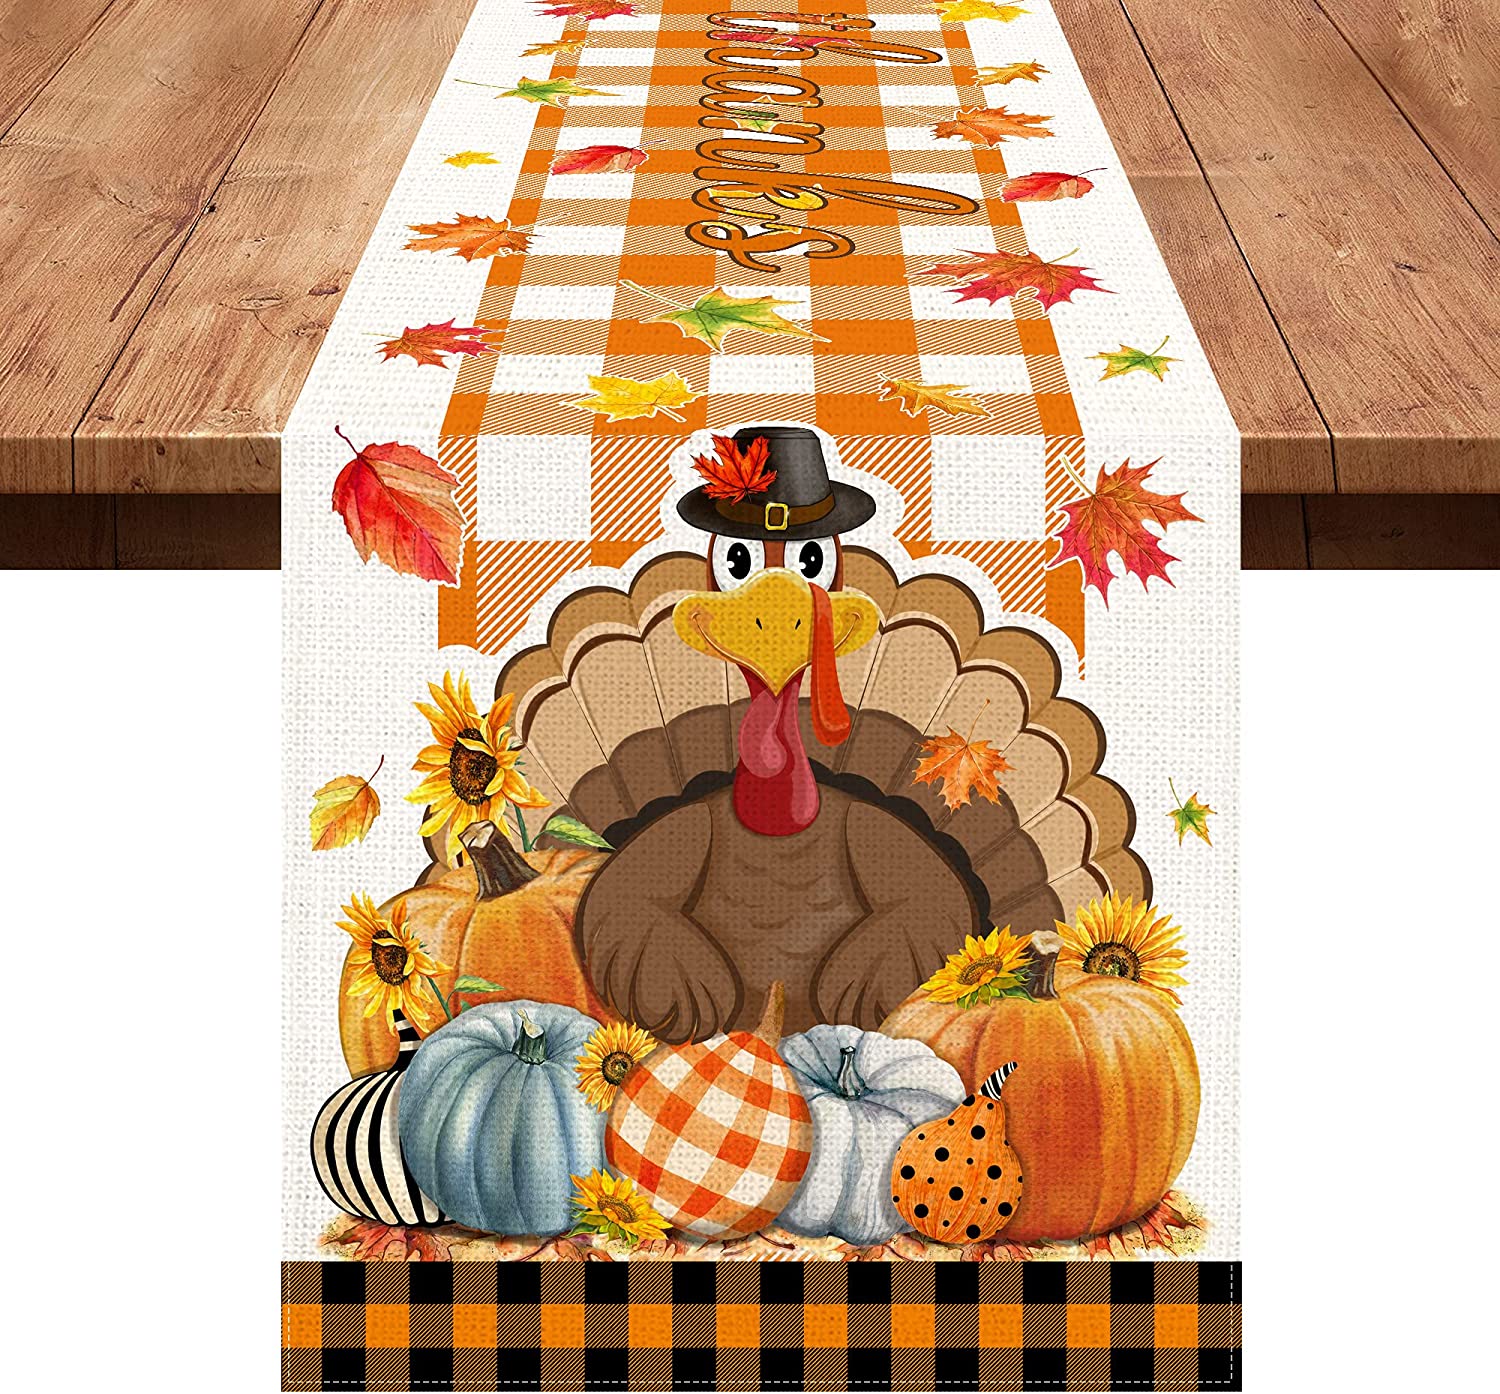 DIY Thankful Table Runner // Easy & Budget-friendly Thanksgiving Table Idea  - This is our Bliss